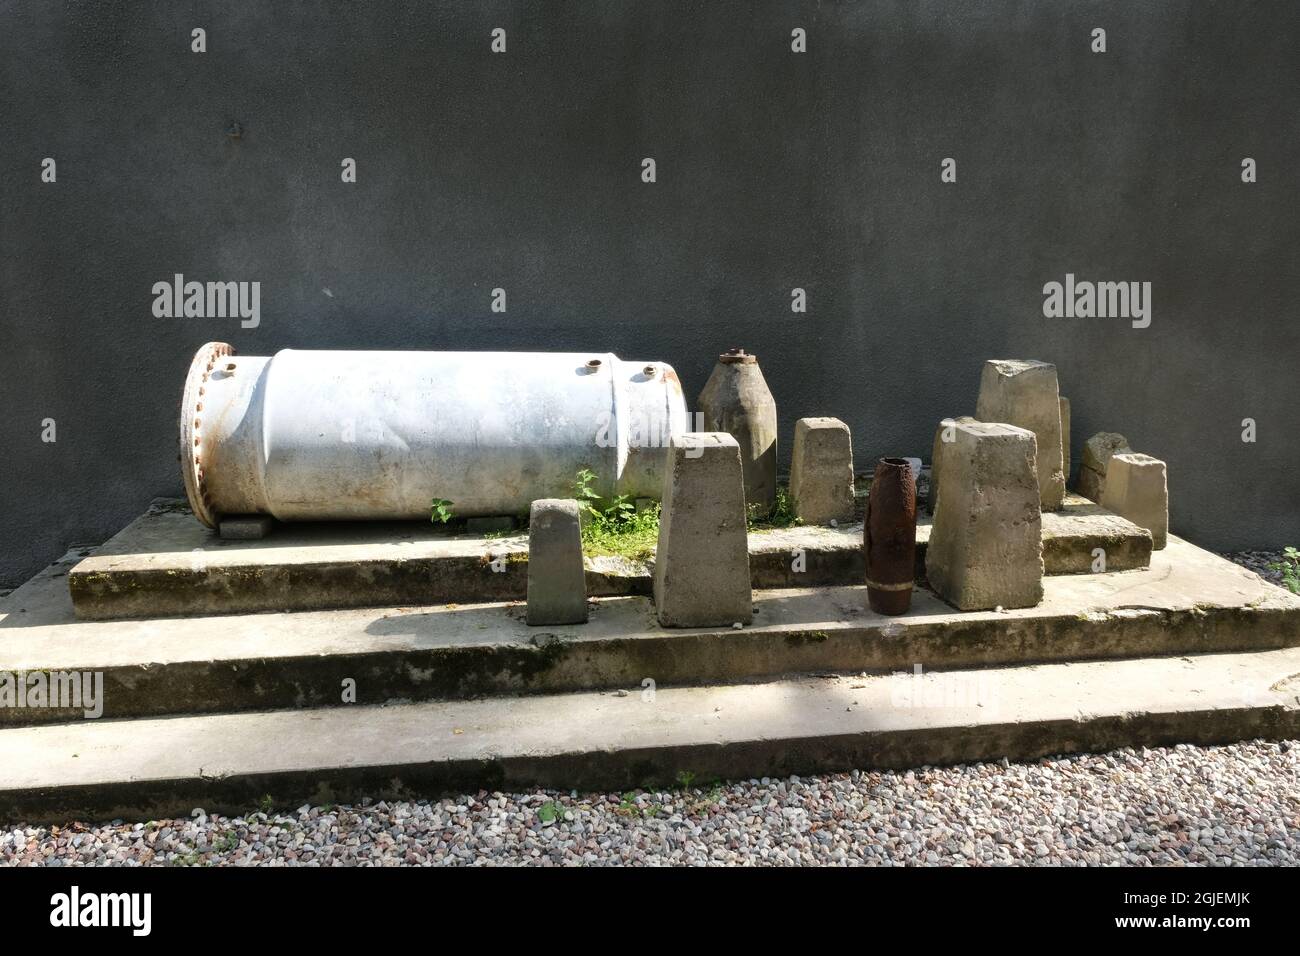 Ketrzyn, Gierloz, Poland - July 19, 2021: findings at the Wolf's Lair (Wilczy Szaniec, Wolfsschanze) built by the Organisation Todt. Stock Photo